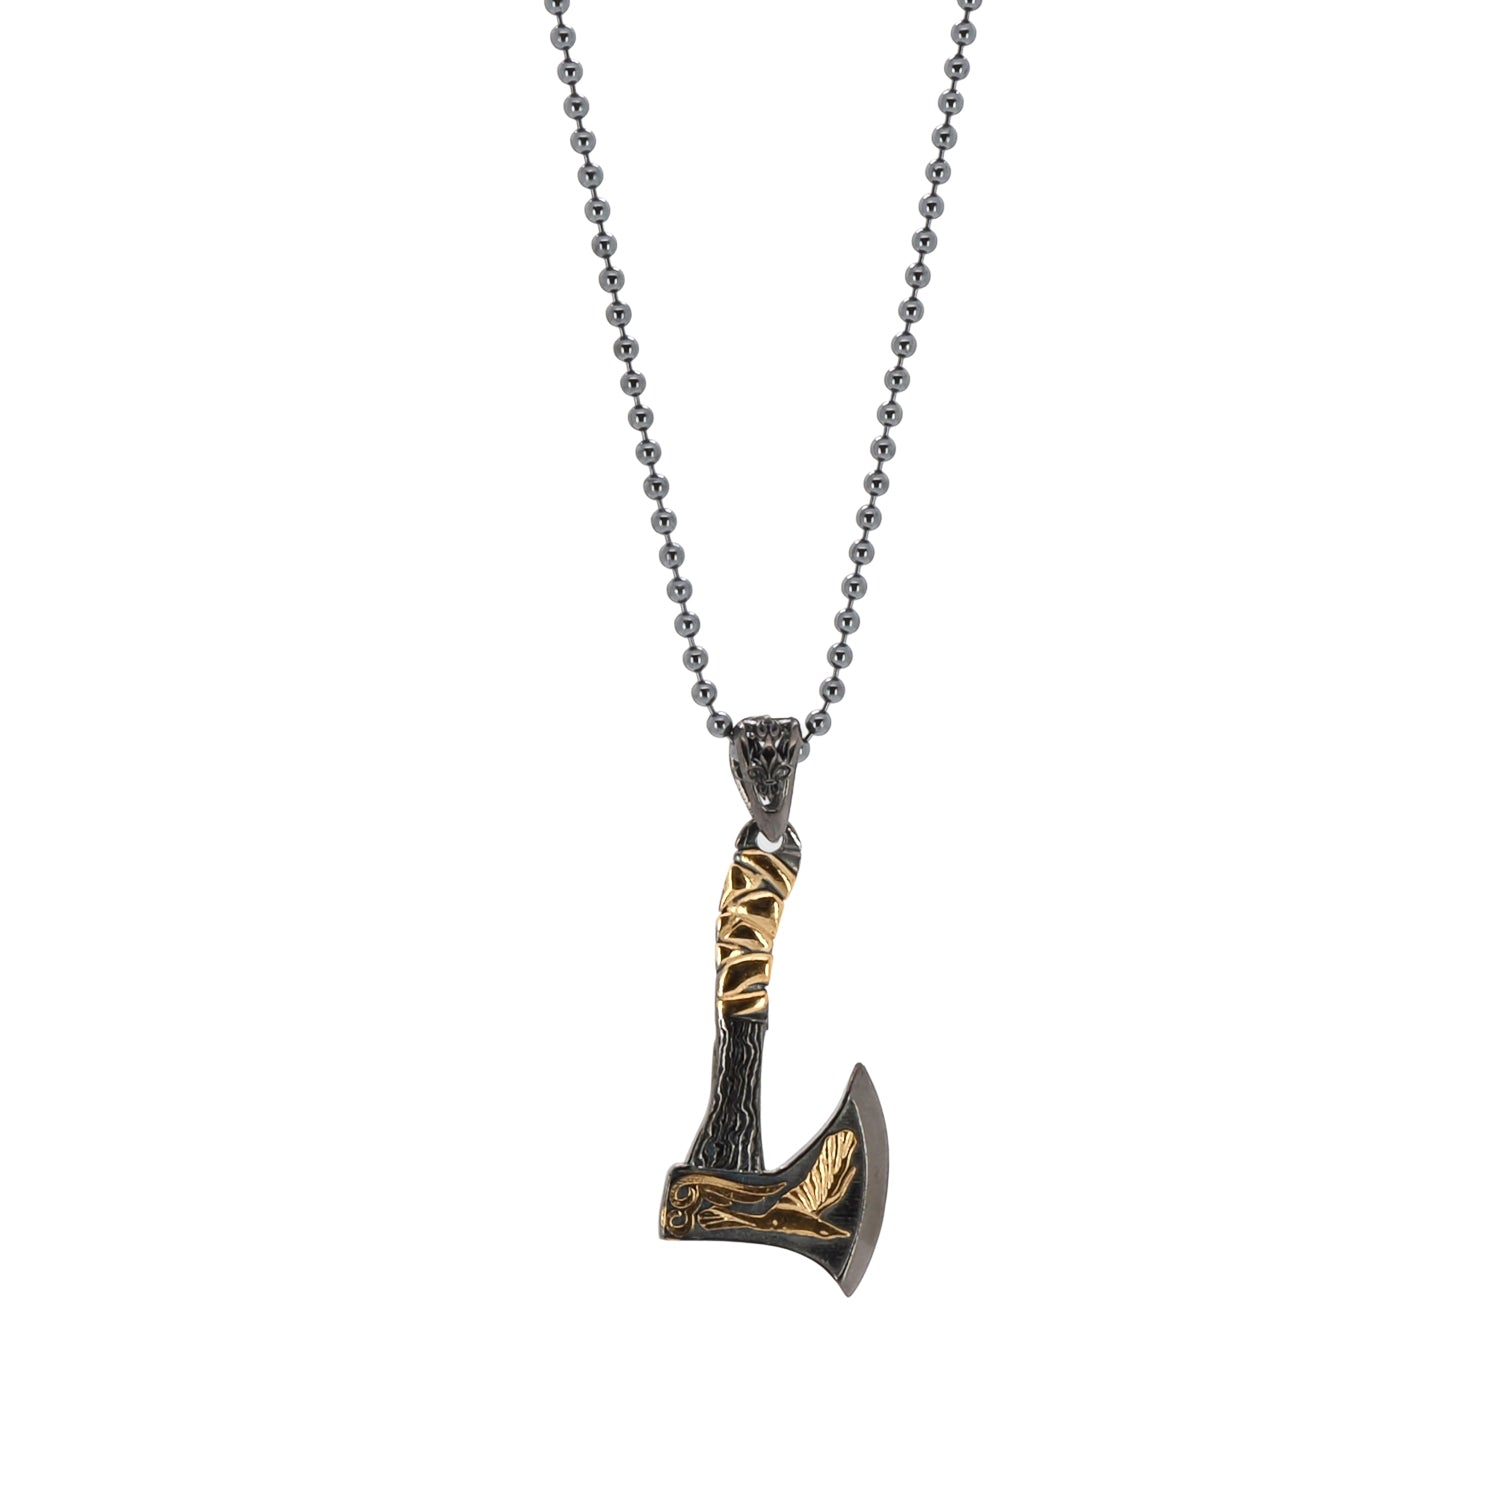 Carry Viking valor: Sterling Silver & Gold Pendant Chain Necklace